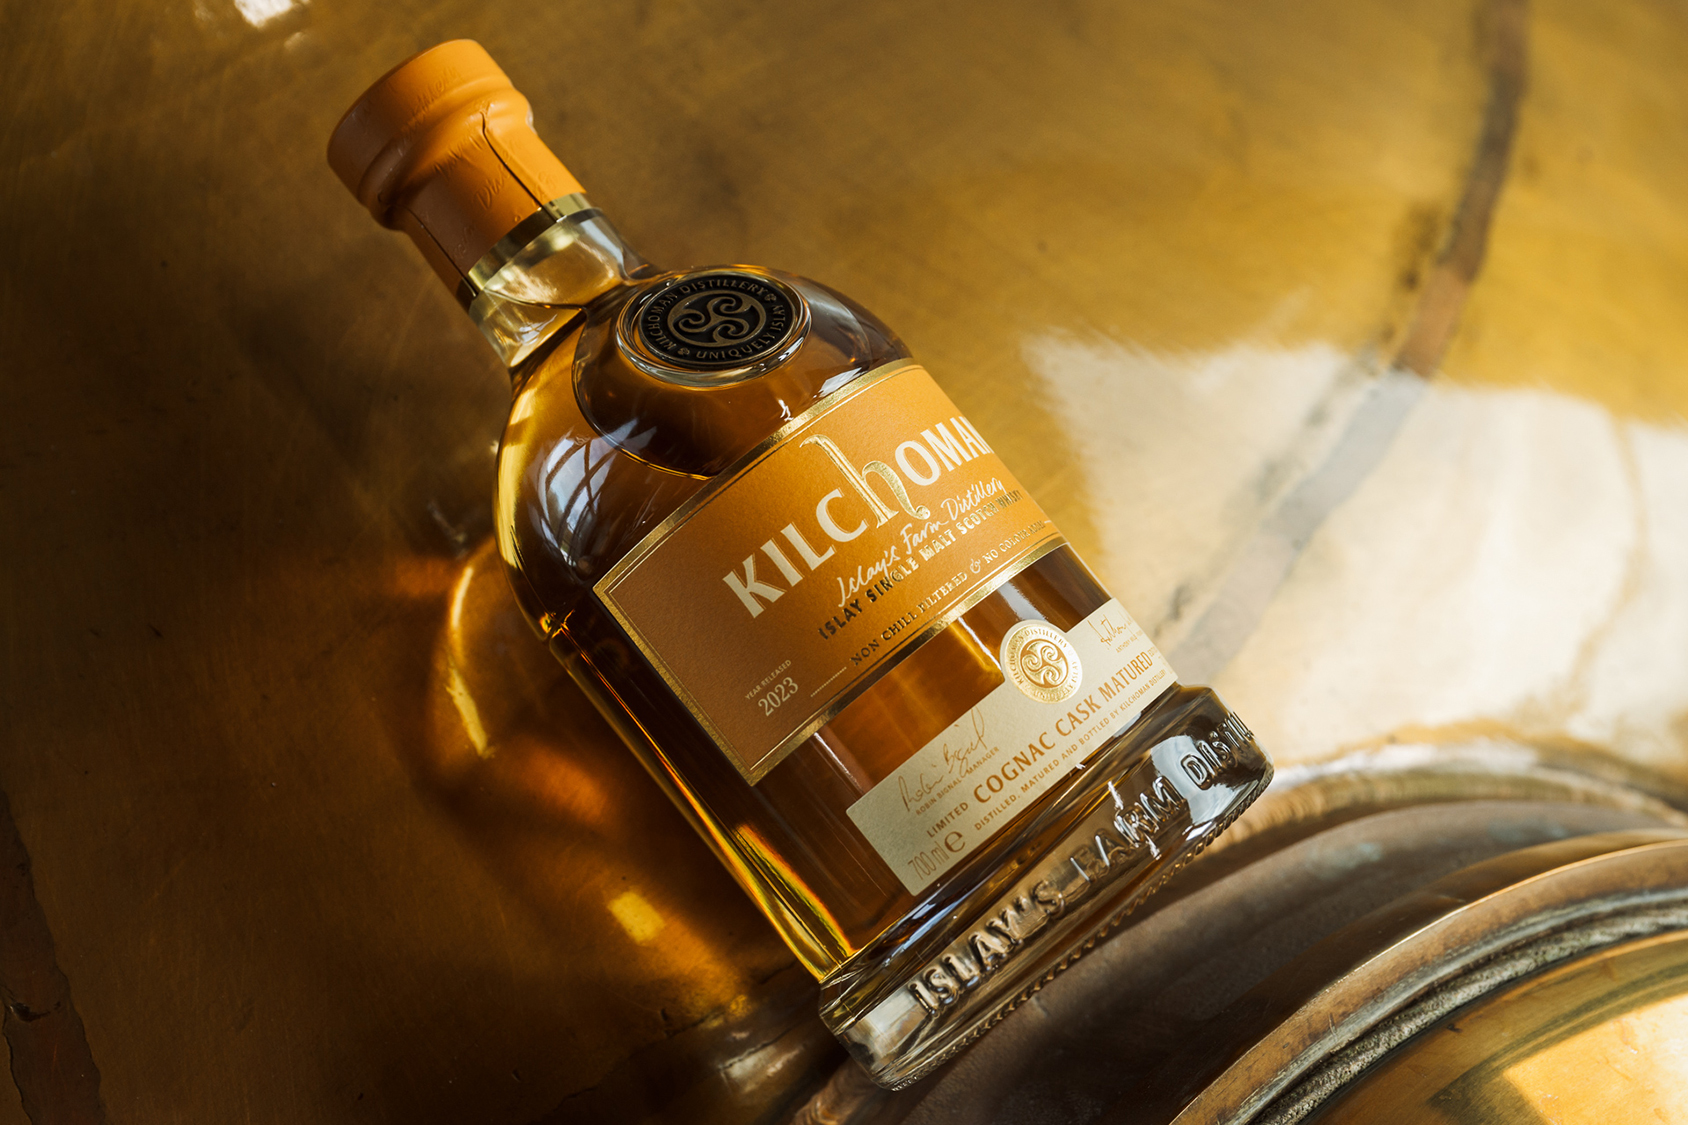 Kilchoman Debuts Fino Sherry And Cognac Limited-Edition Whiskies